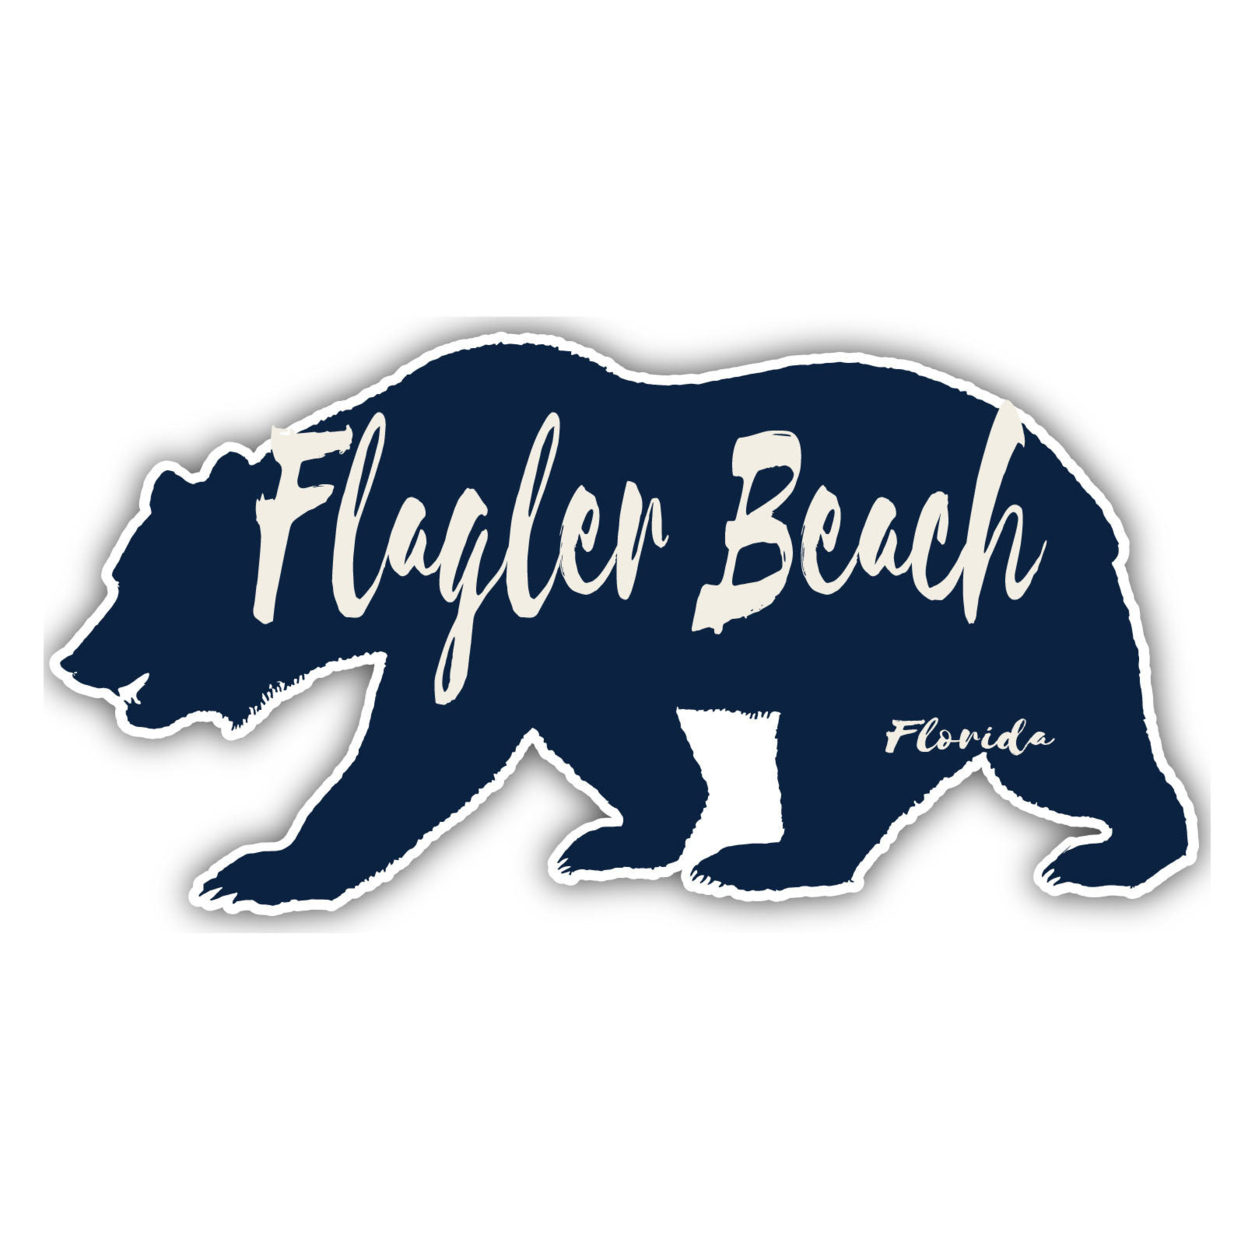 Flagler Beach Florida Souvenir Decorative Stickers (Choose Theme And Size) - 4-Pack, 10-Inch, Tent